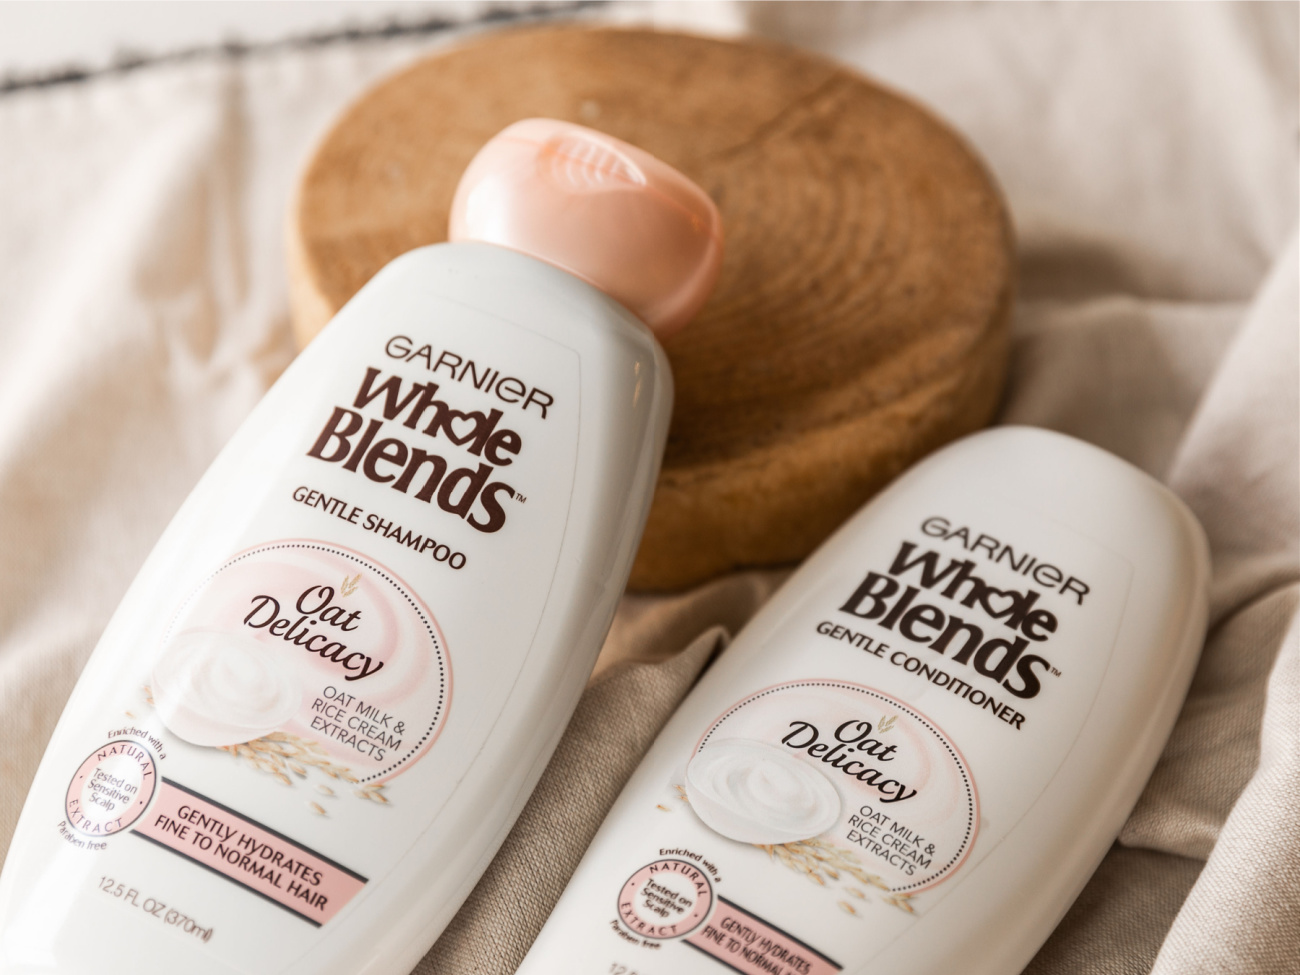 Garnier Whole Blends Haircare As Low As $2.49 At Kroger